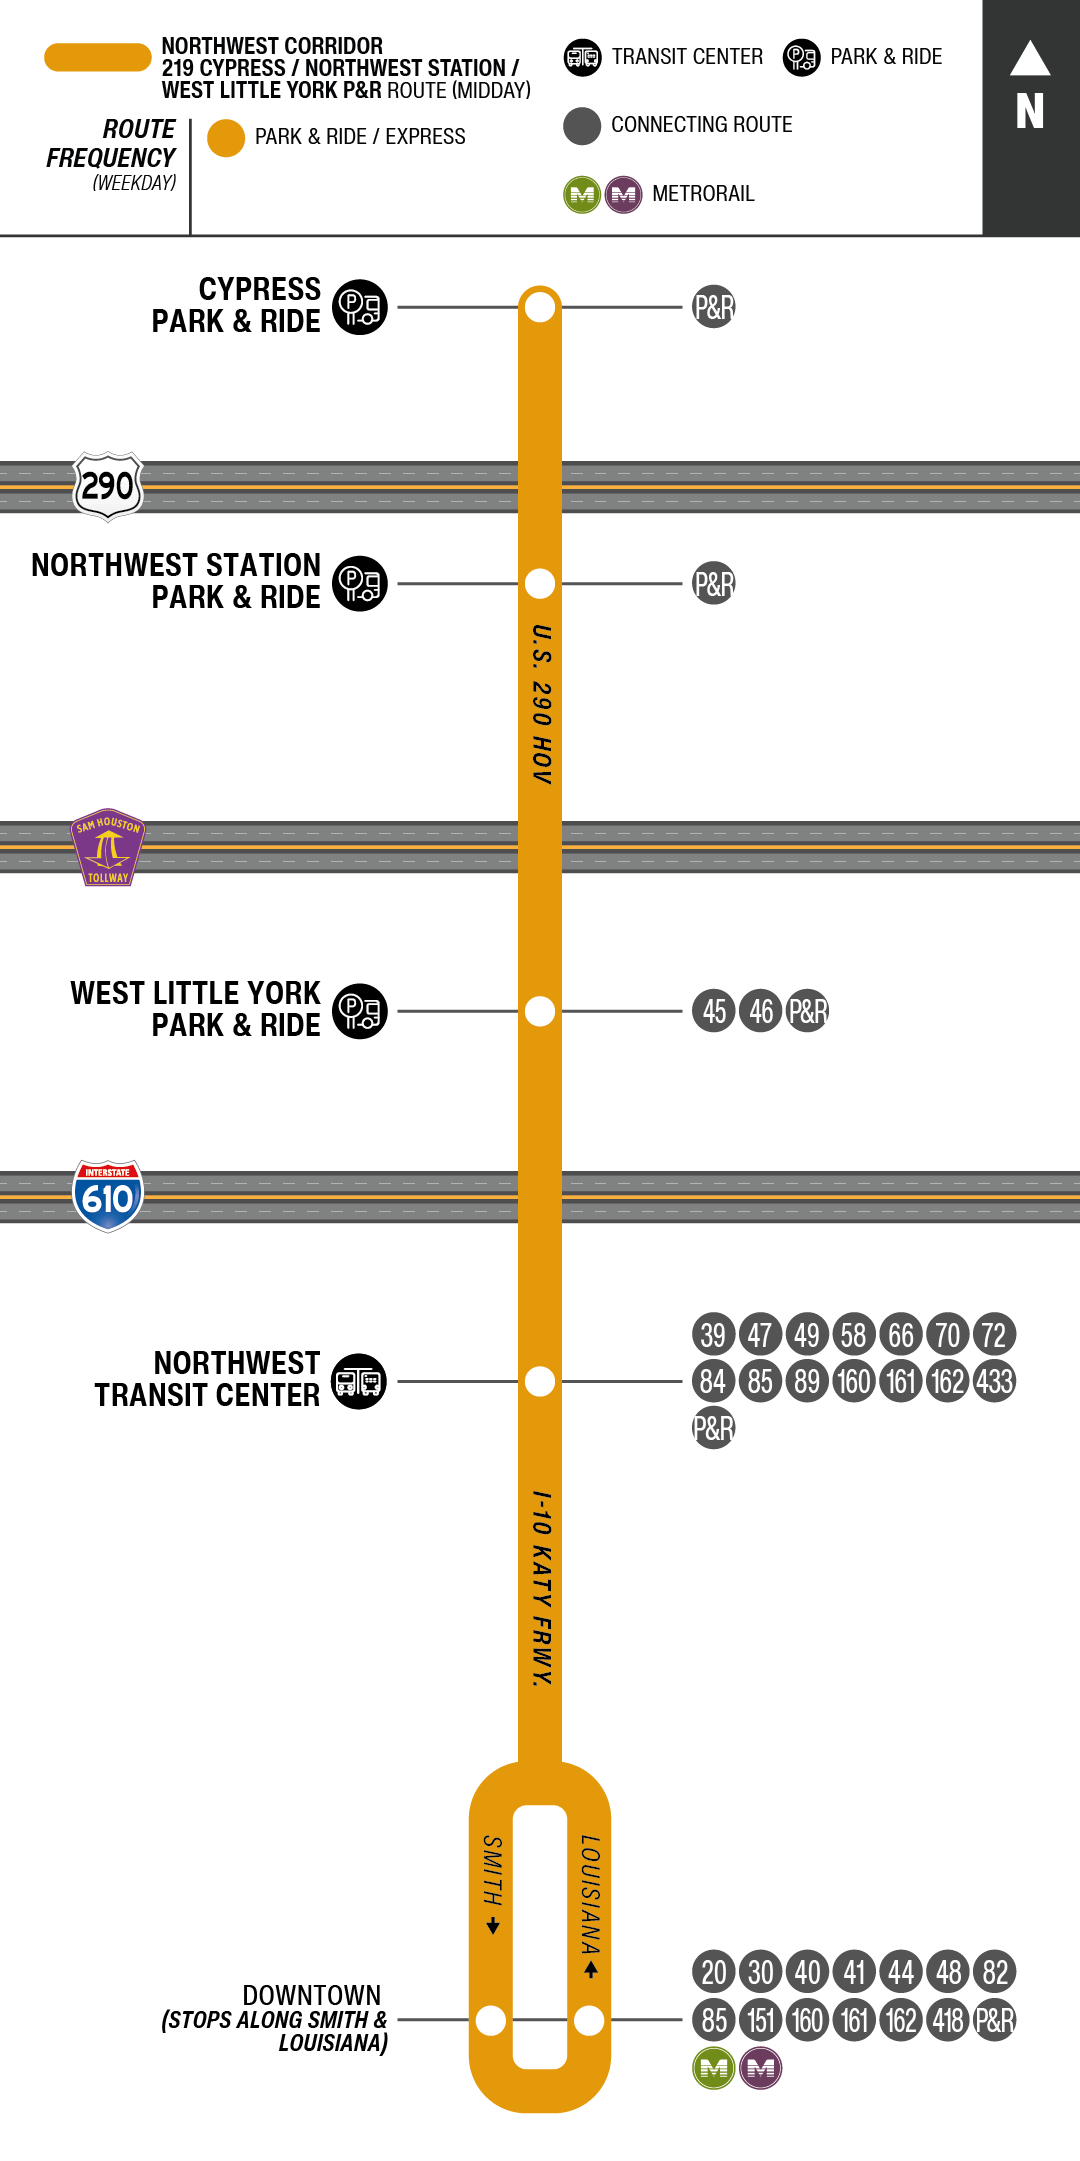 Route map for 219 Cypress / Northwest Station / West Little York Park & Ride bus